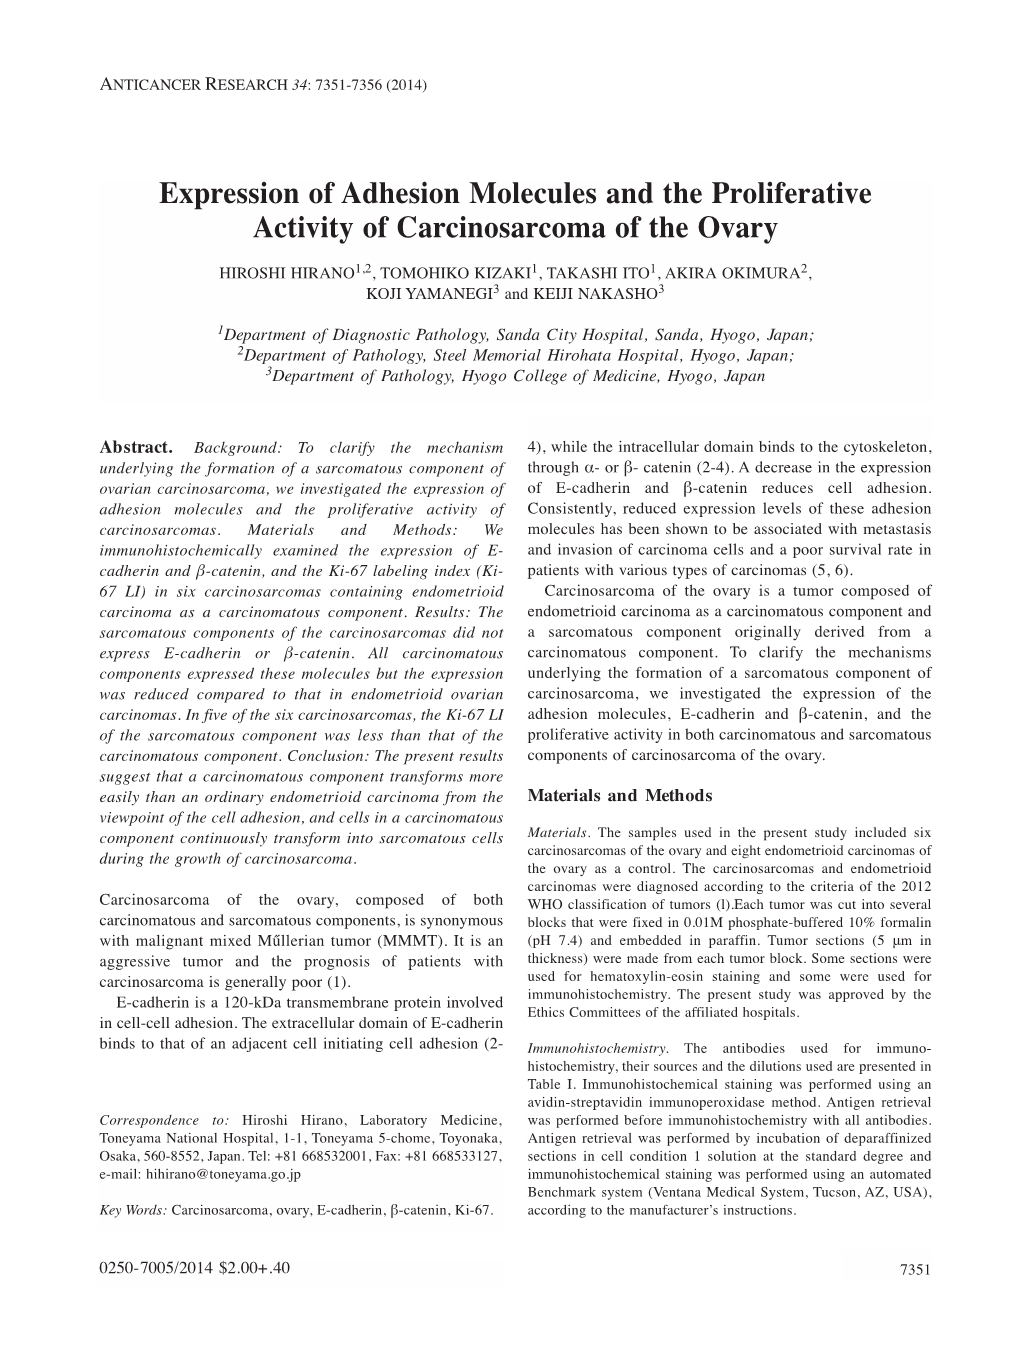 Expression of Adhesion Molecules and the Proliferative Activity of Carcinosarcoma of the Ovary